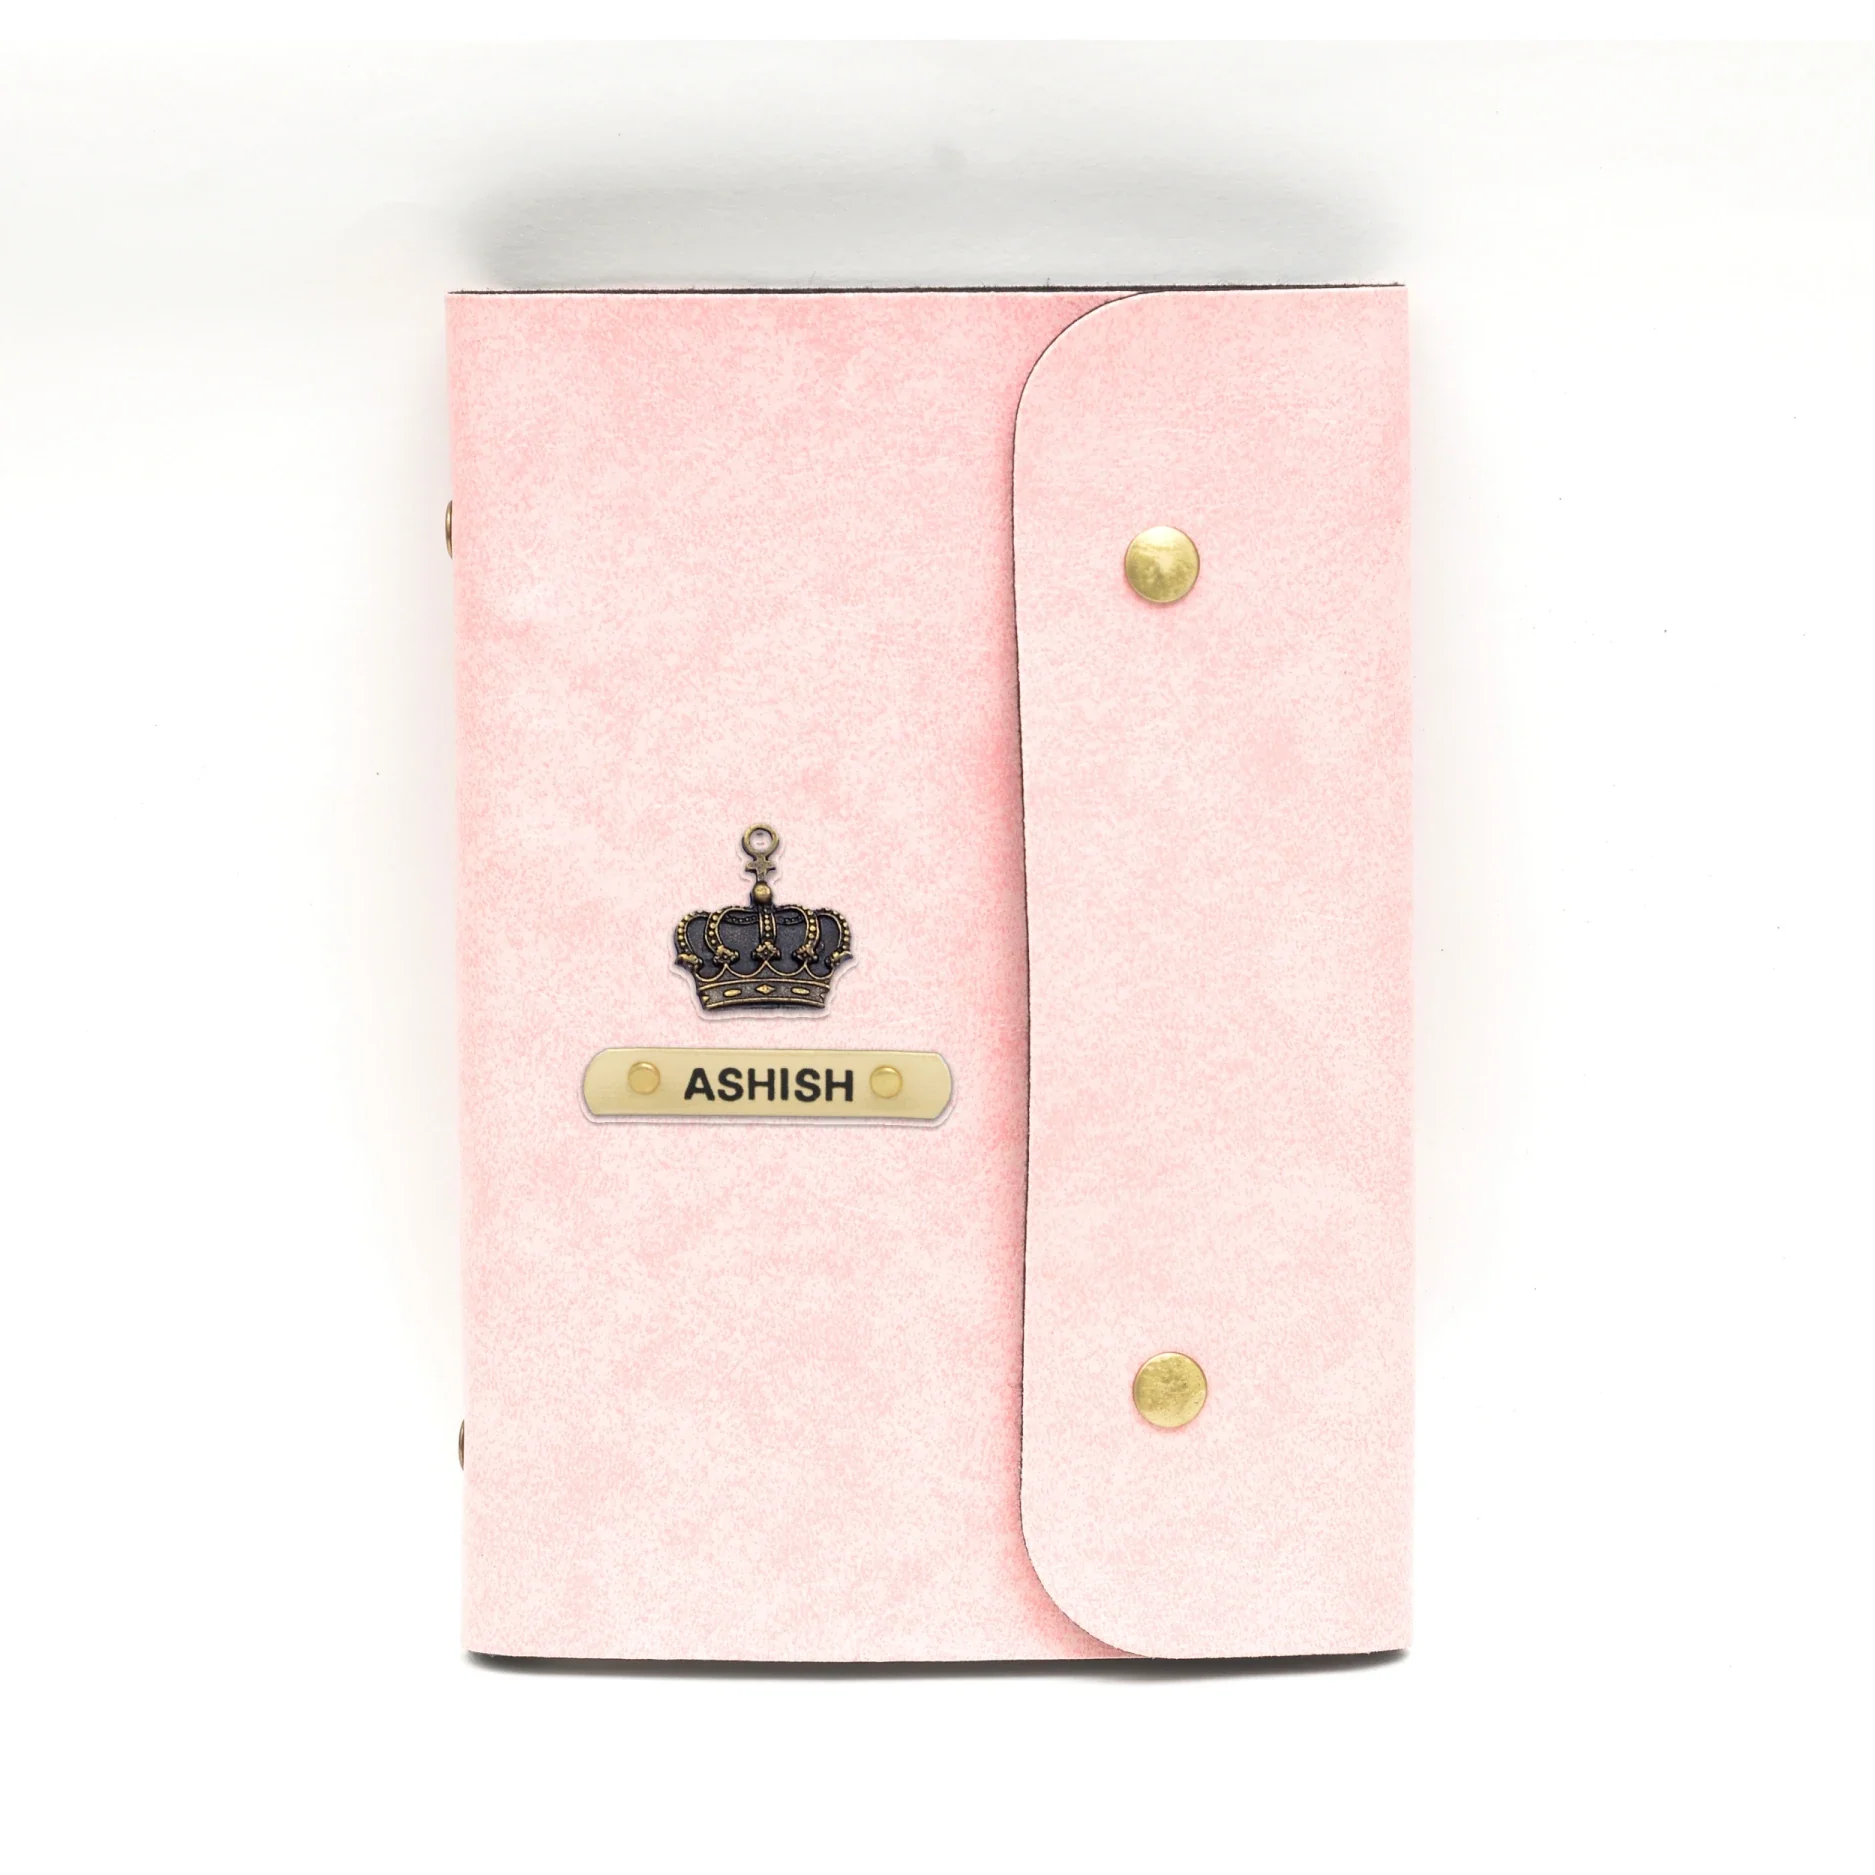 Make a statement with our elegant and practical customized leather buttoned diary. Perfect for any occasion, it's the perfect way to stay organized and stylish.